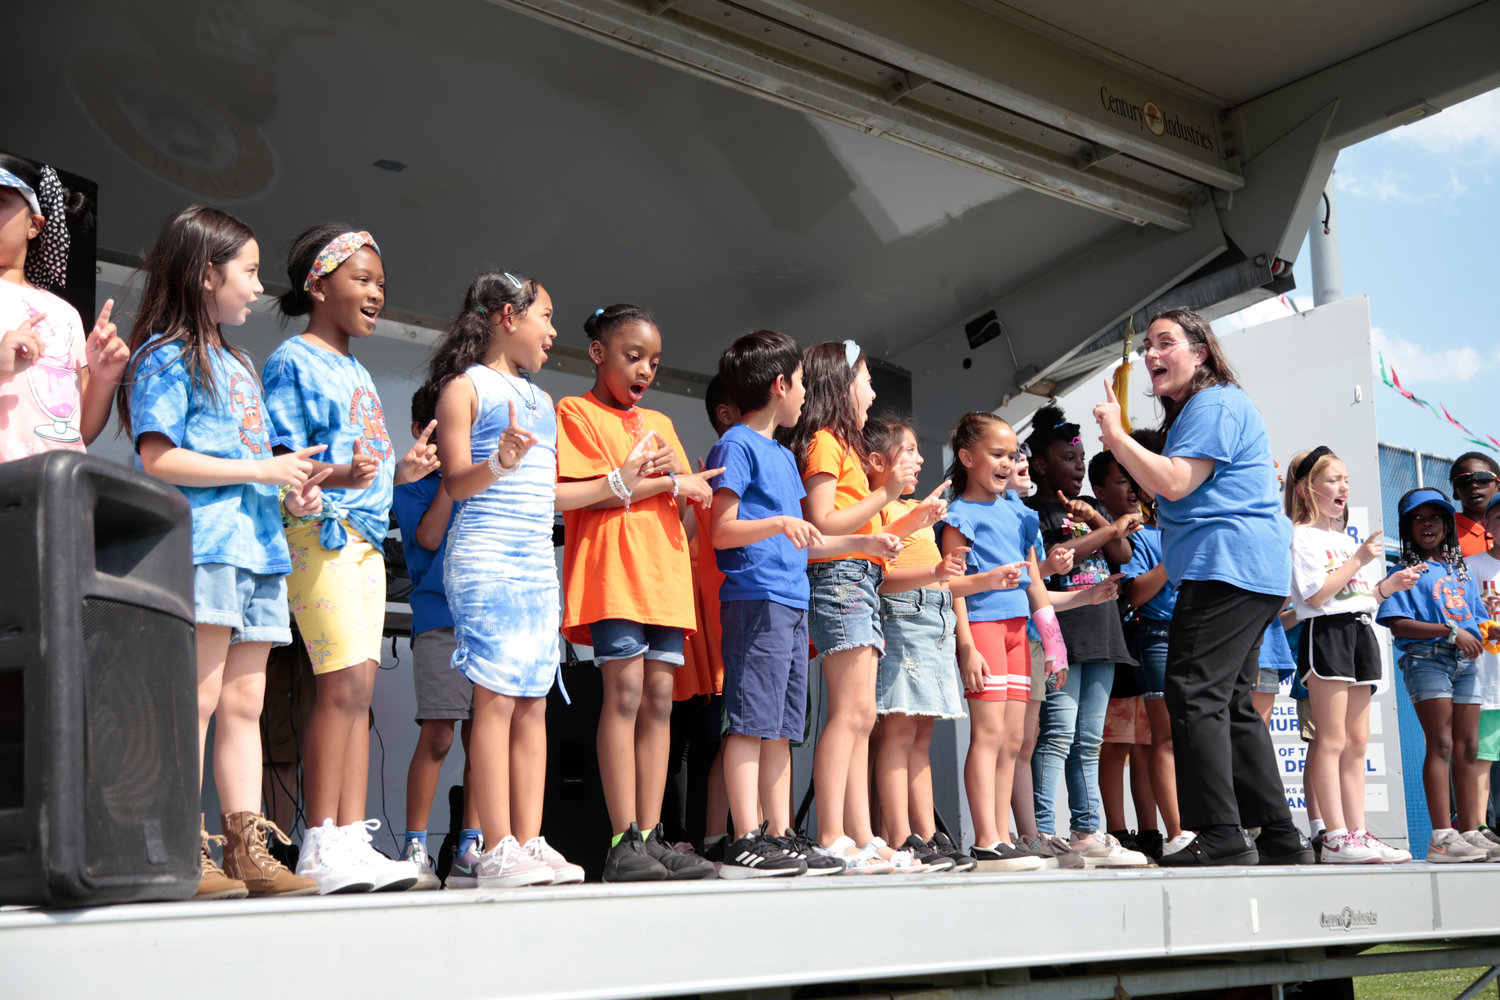 Members of the Maurice W. Downing 2nd grade Glee Club, led by Mishel Wowk, entertained the crowd with their rendition of "Stand By Me."